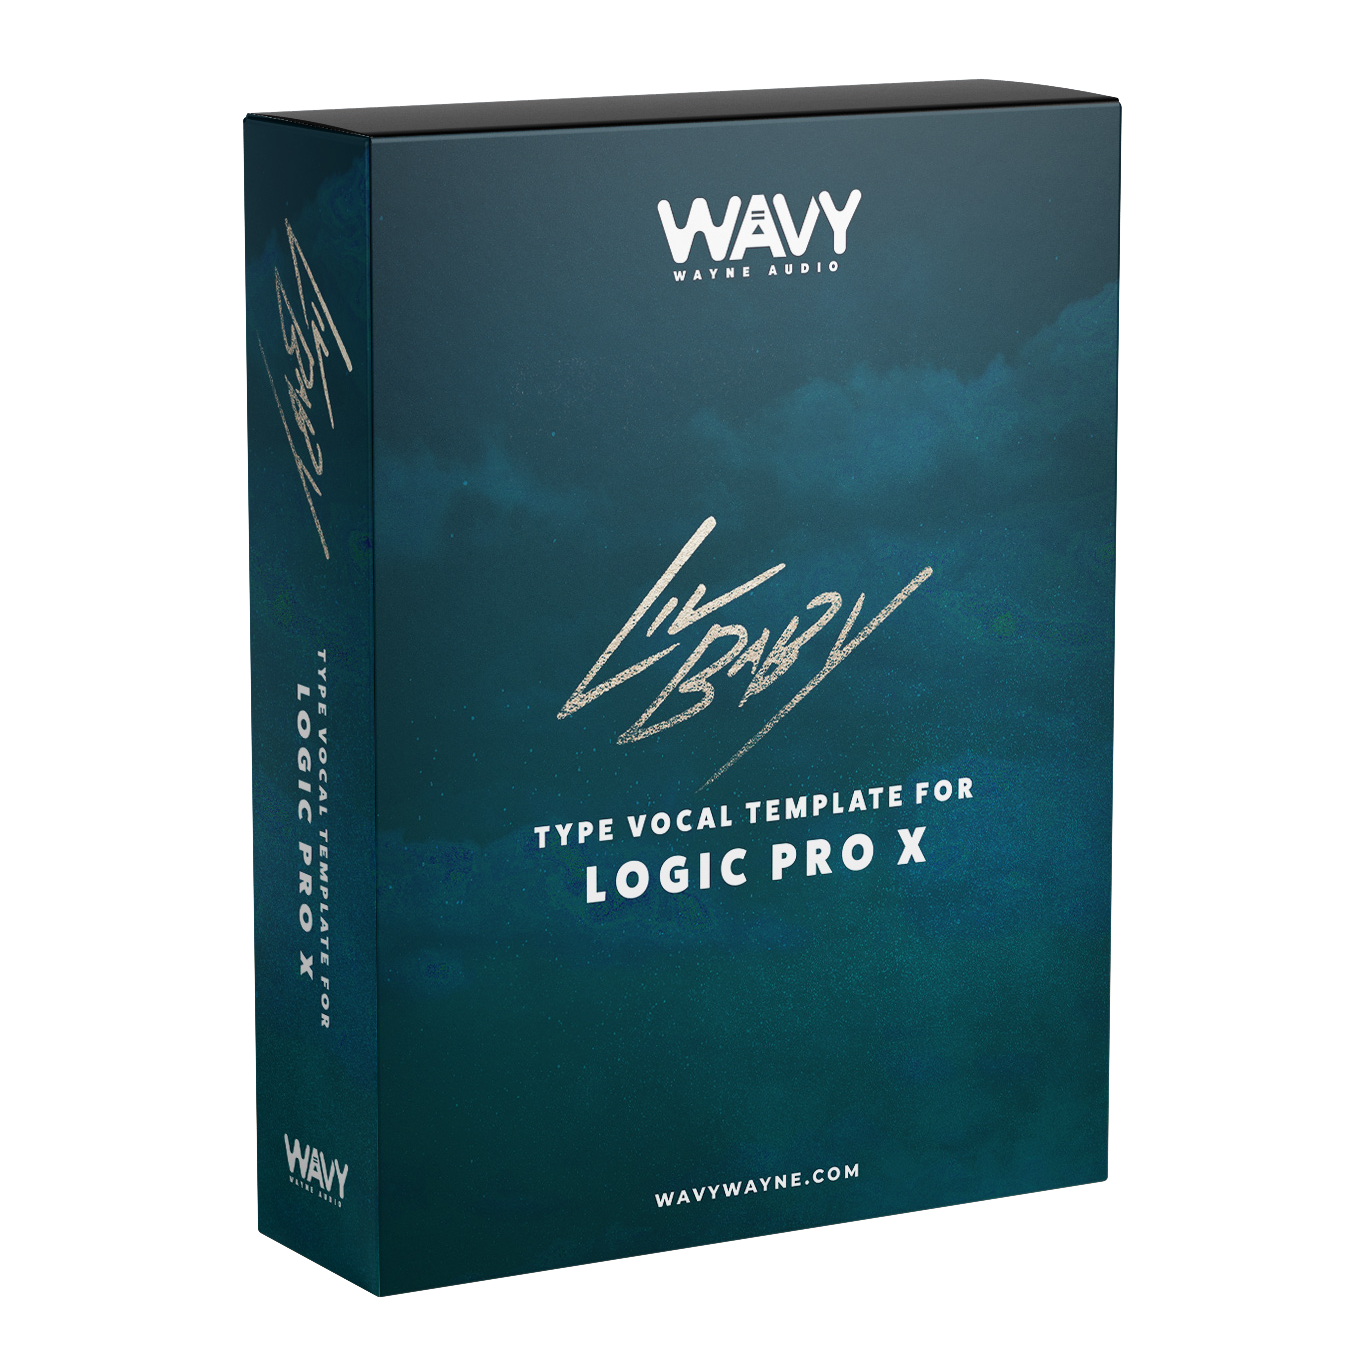 Lil Baby Type Vocal Template for Logic Pro X